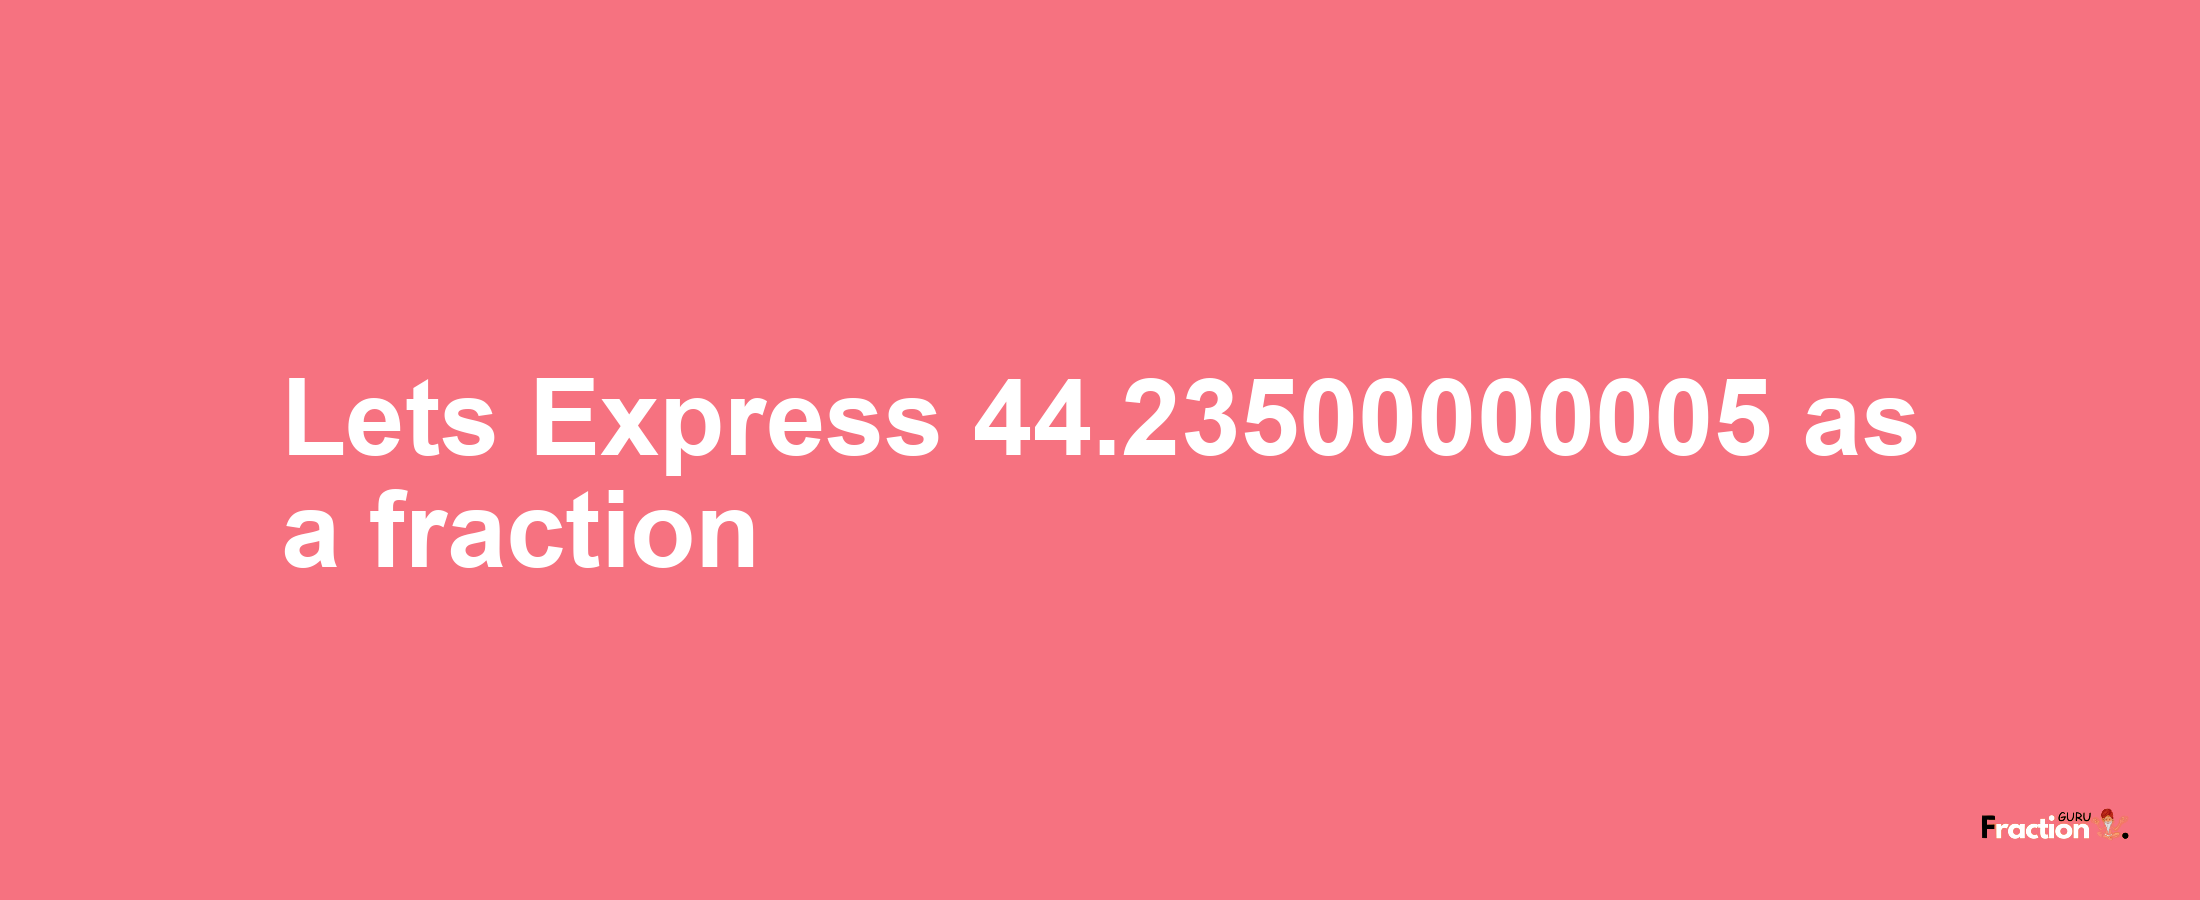 Lets Express 44.23500000005 as afraction